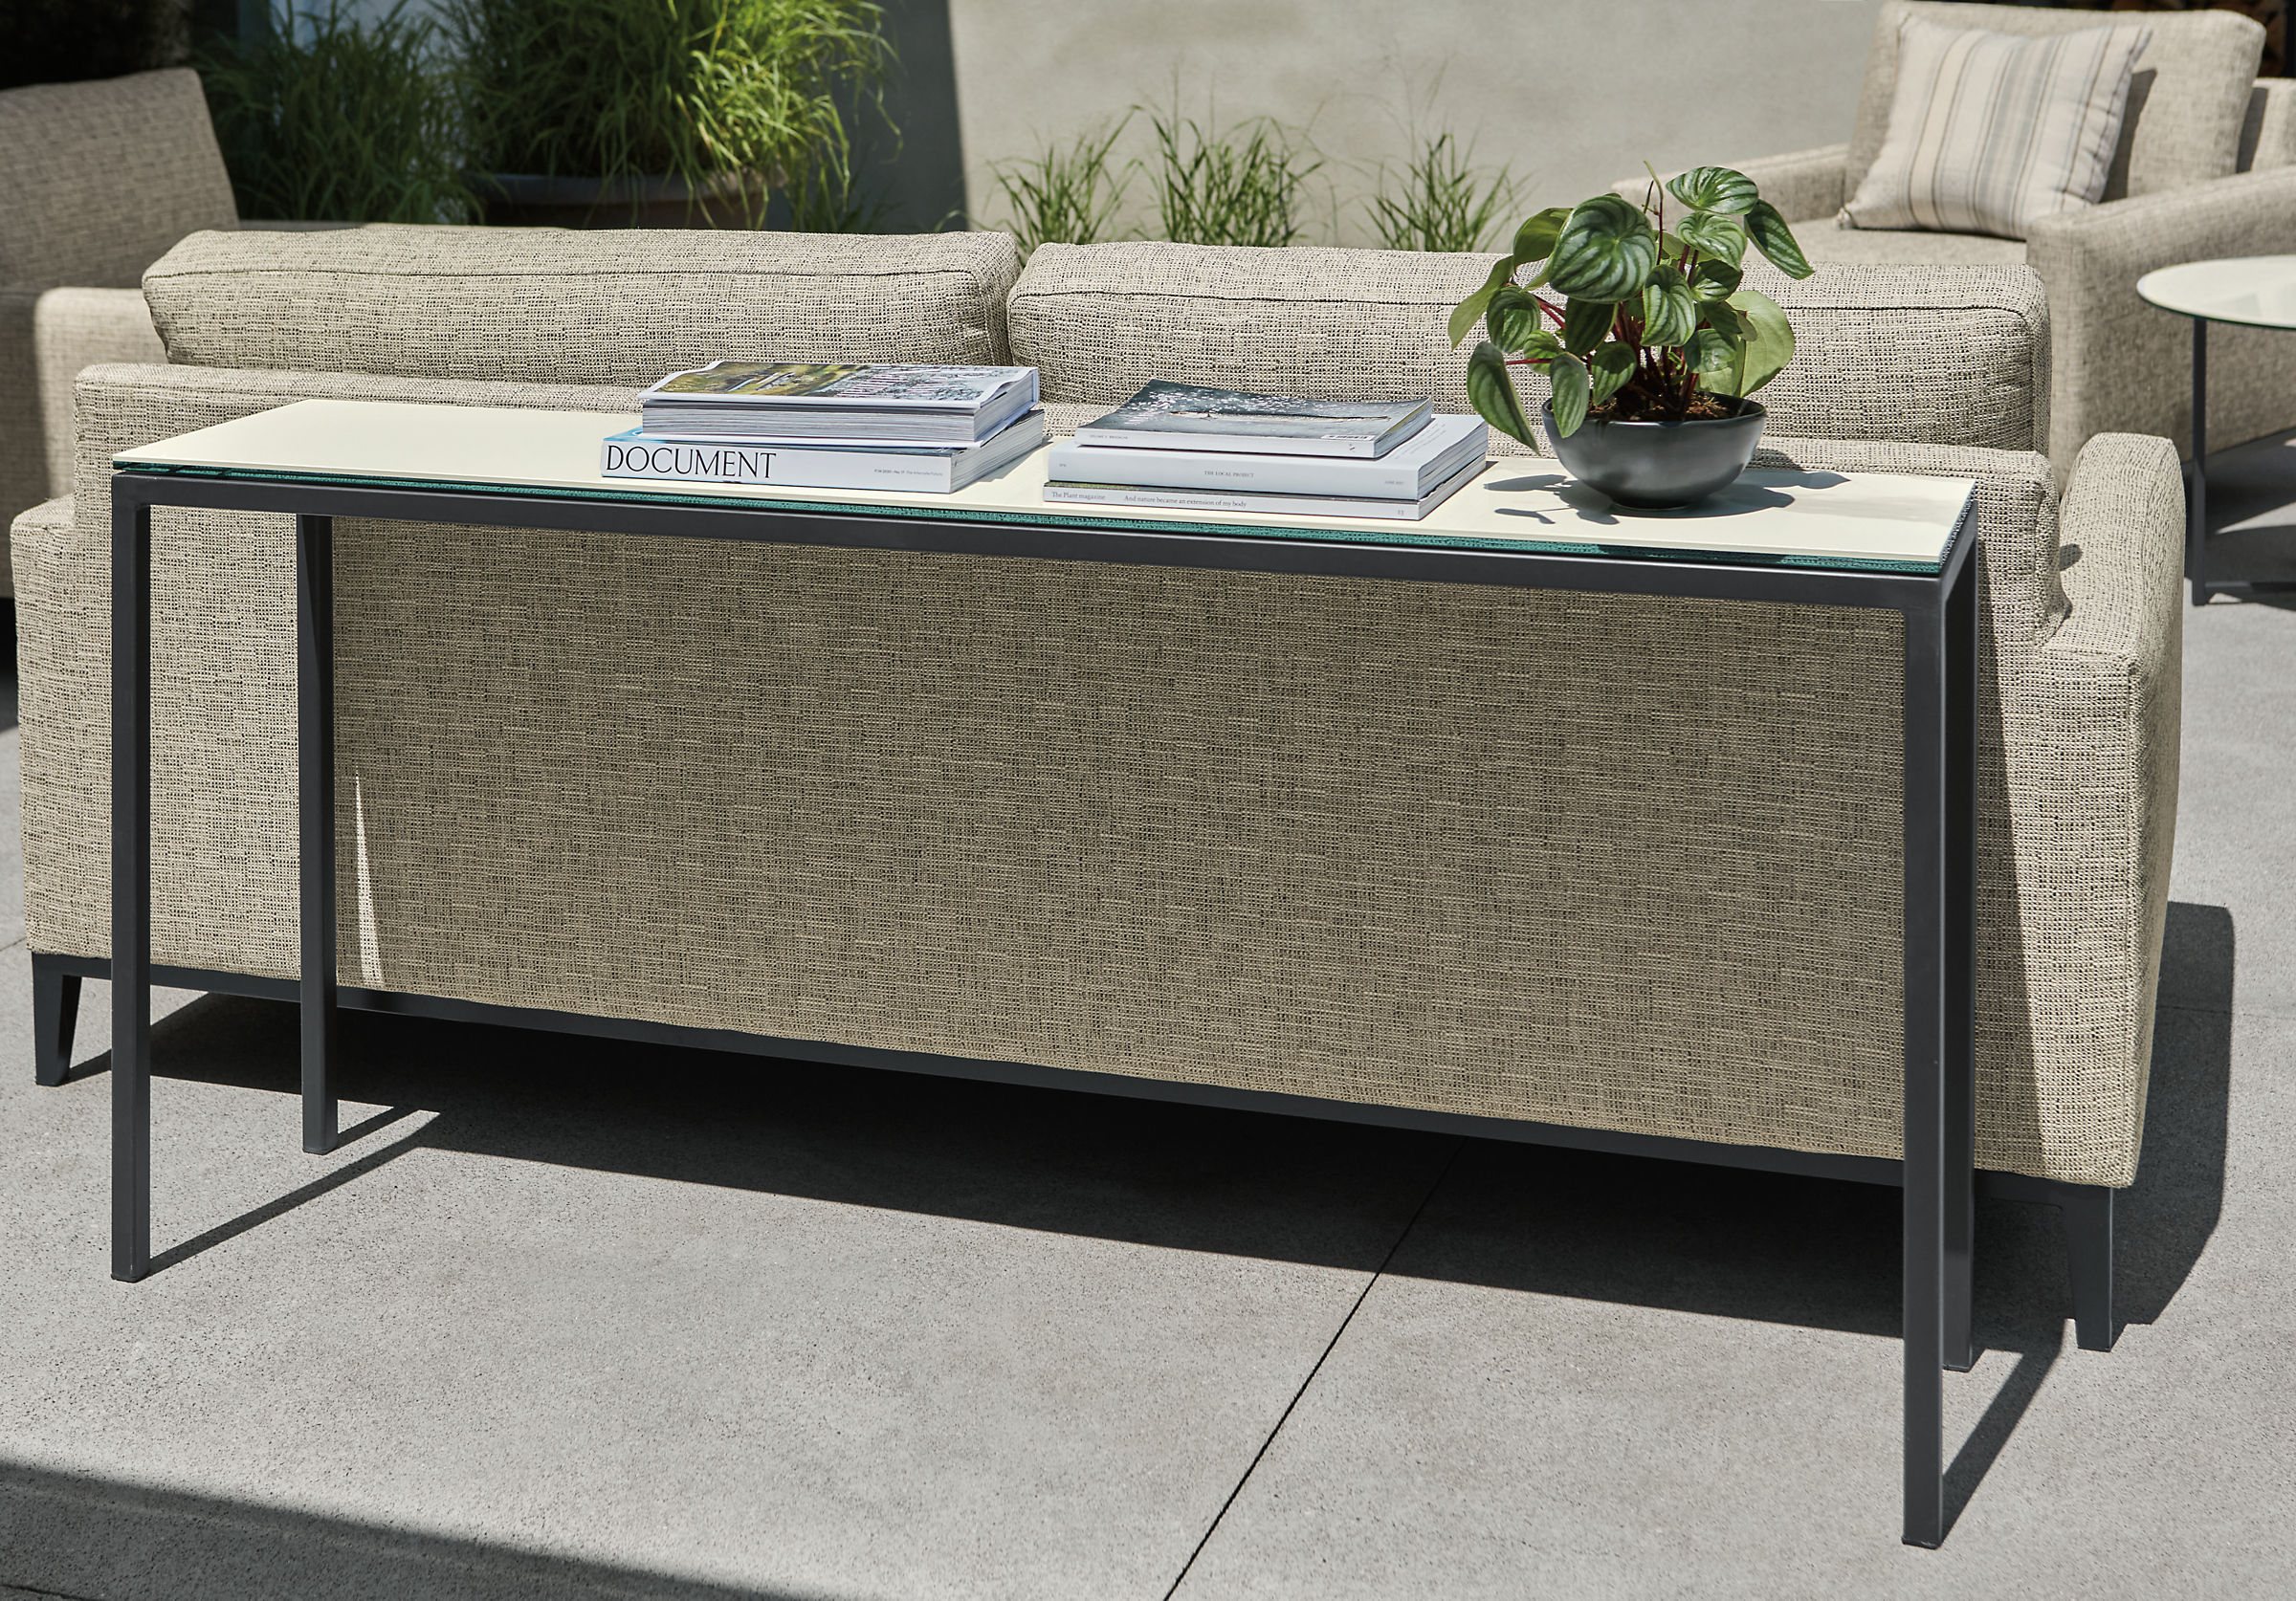 Parsons 60w 12d outdoor console table in graphite with marbled white ceramic top and Tomas sofa and chairs.